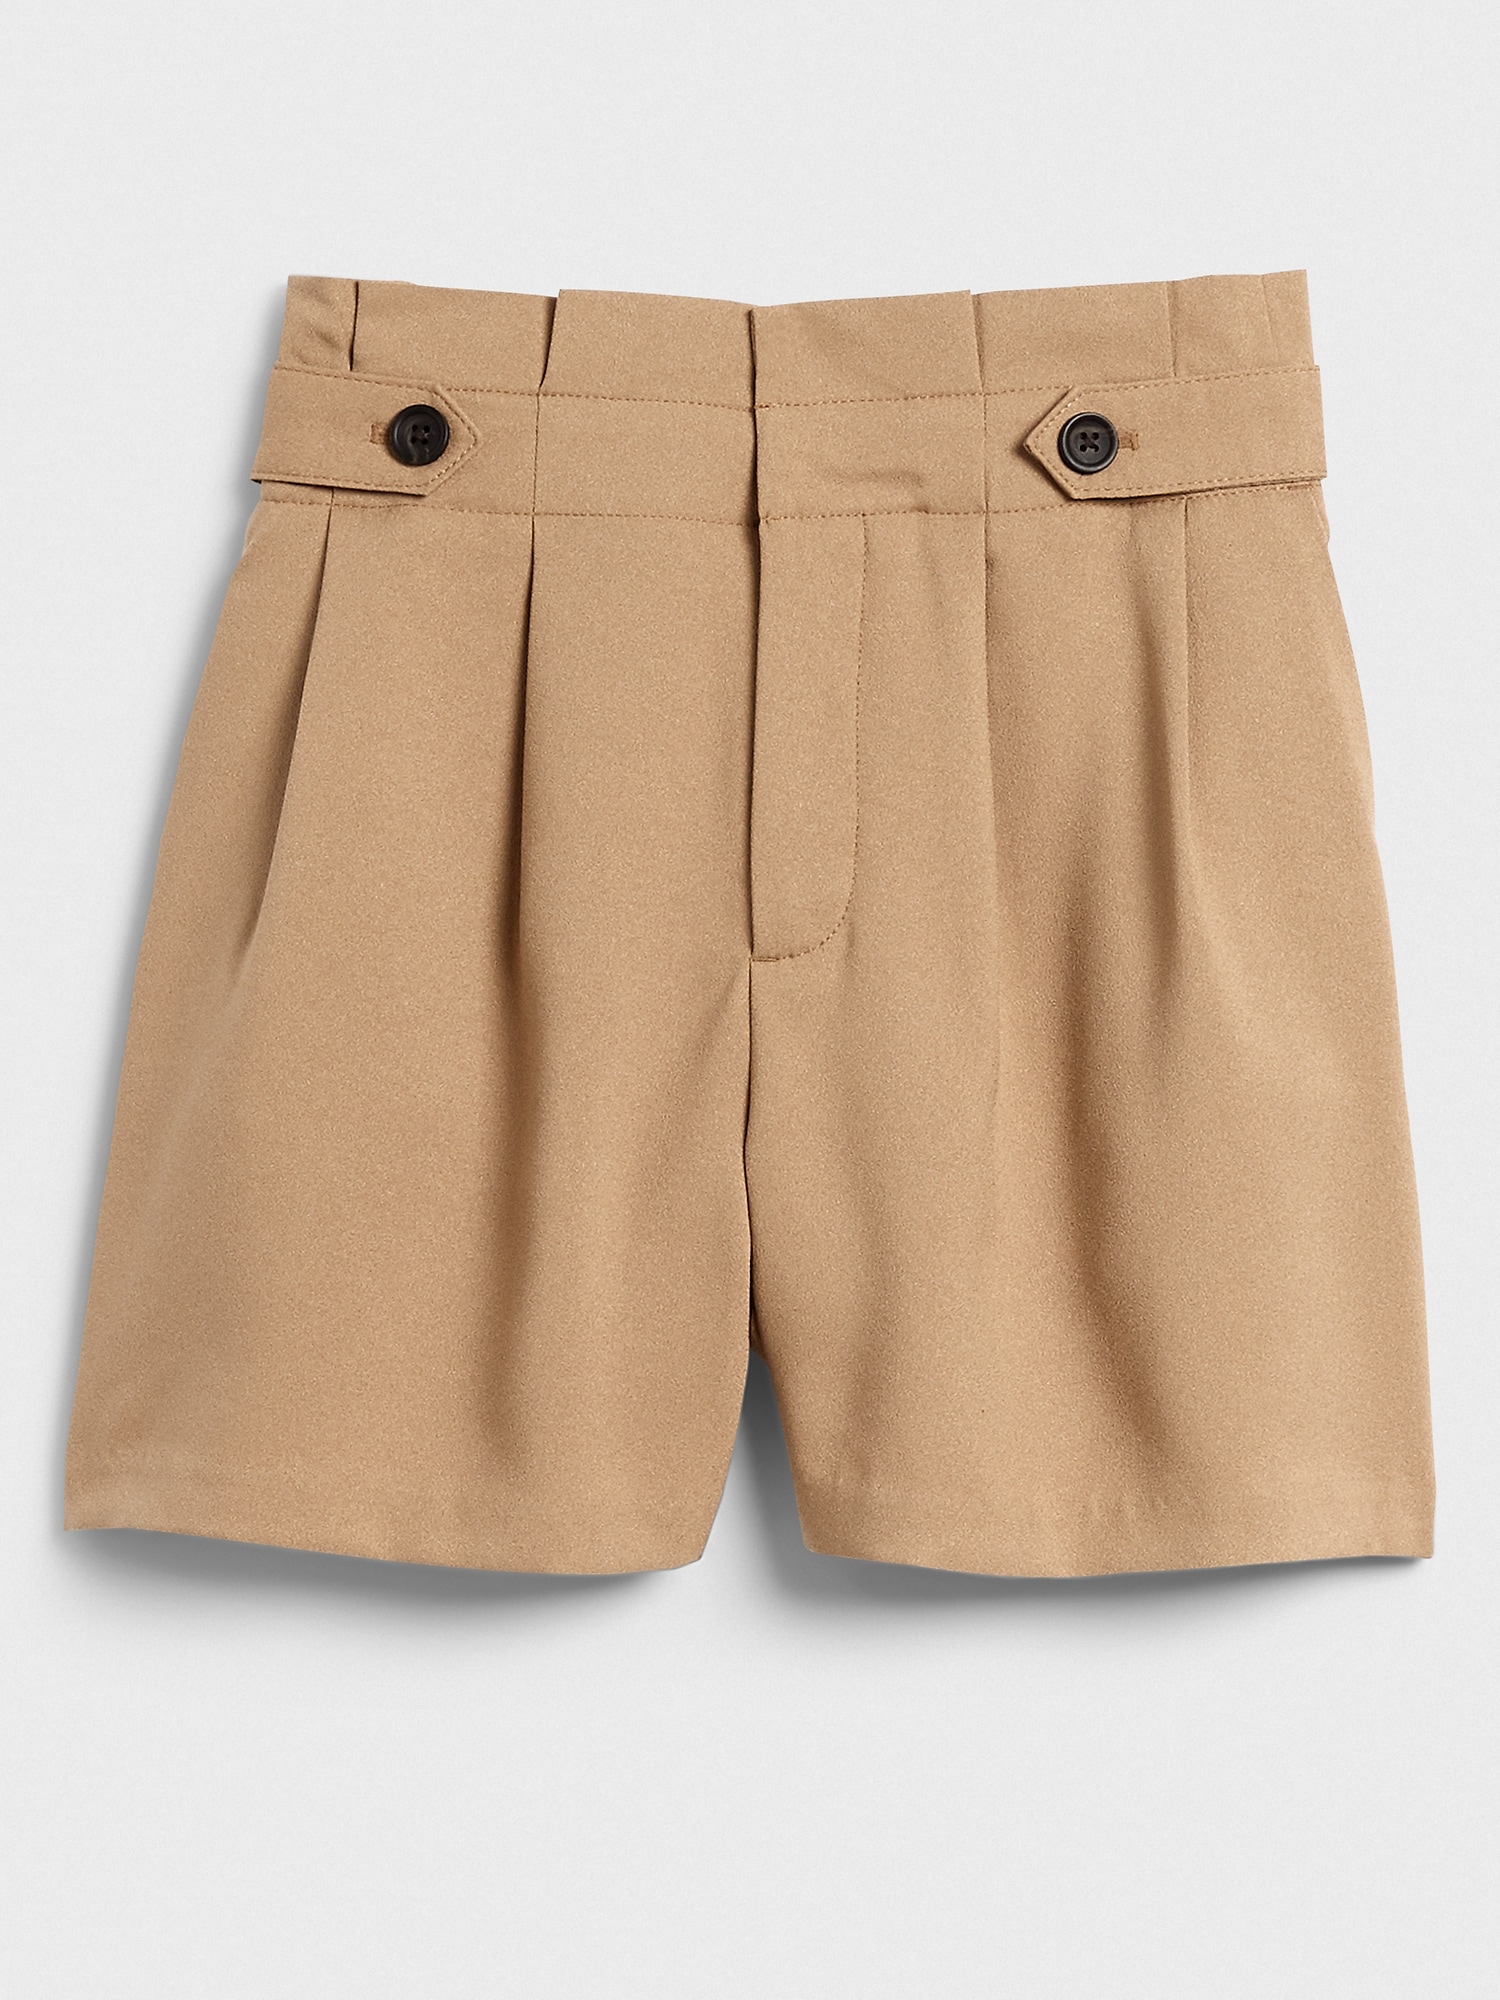 Button-Tab Pull-On Shorts - 5 inch inseam